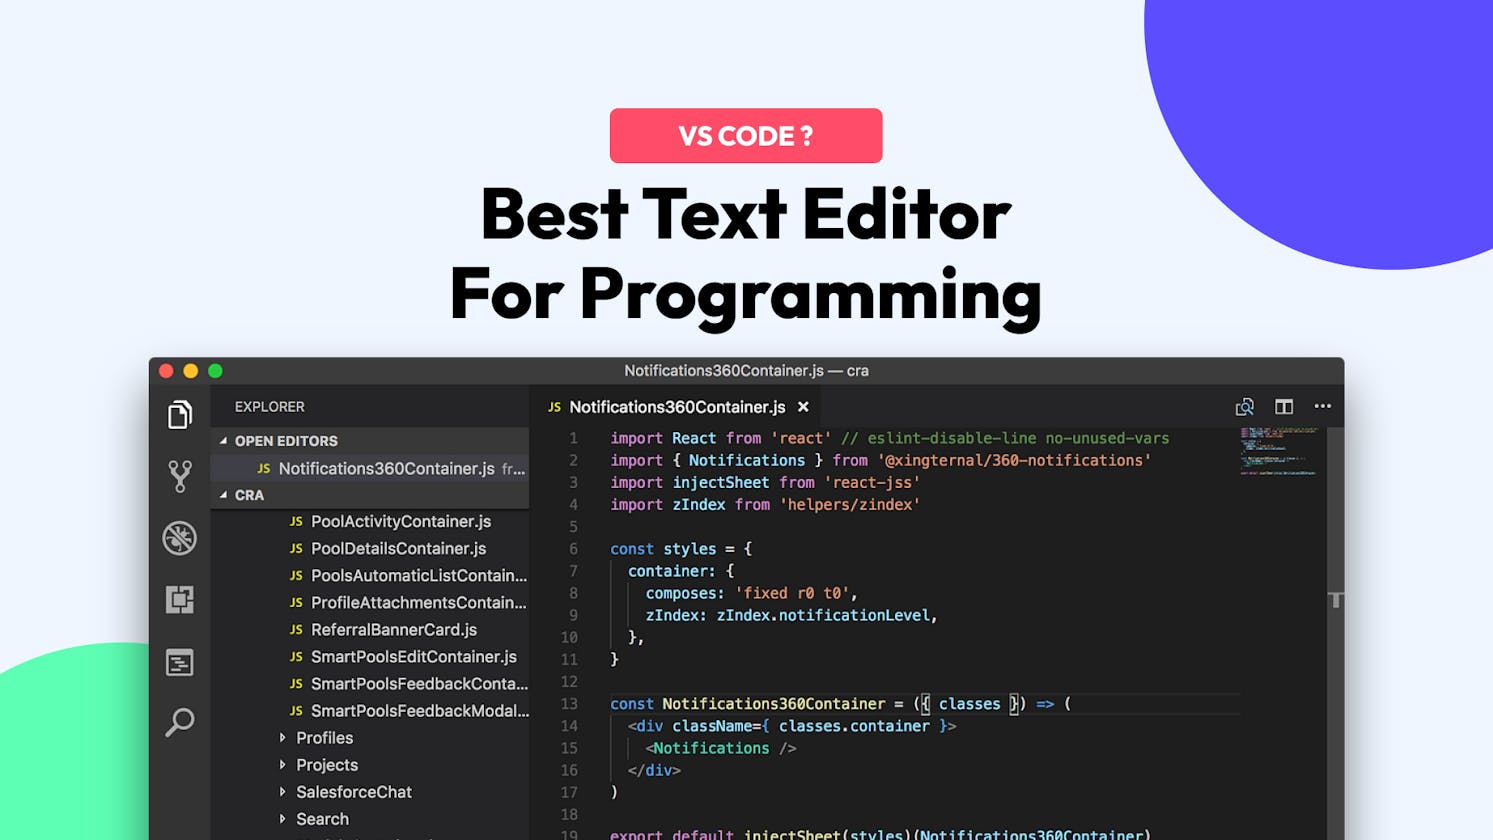 Best Text Editor For Programming